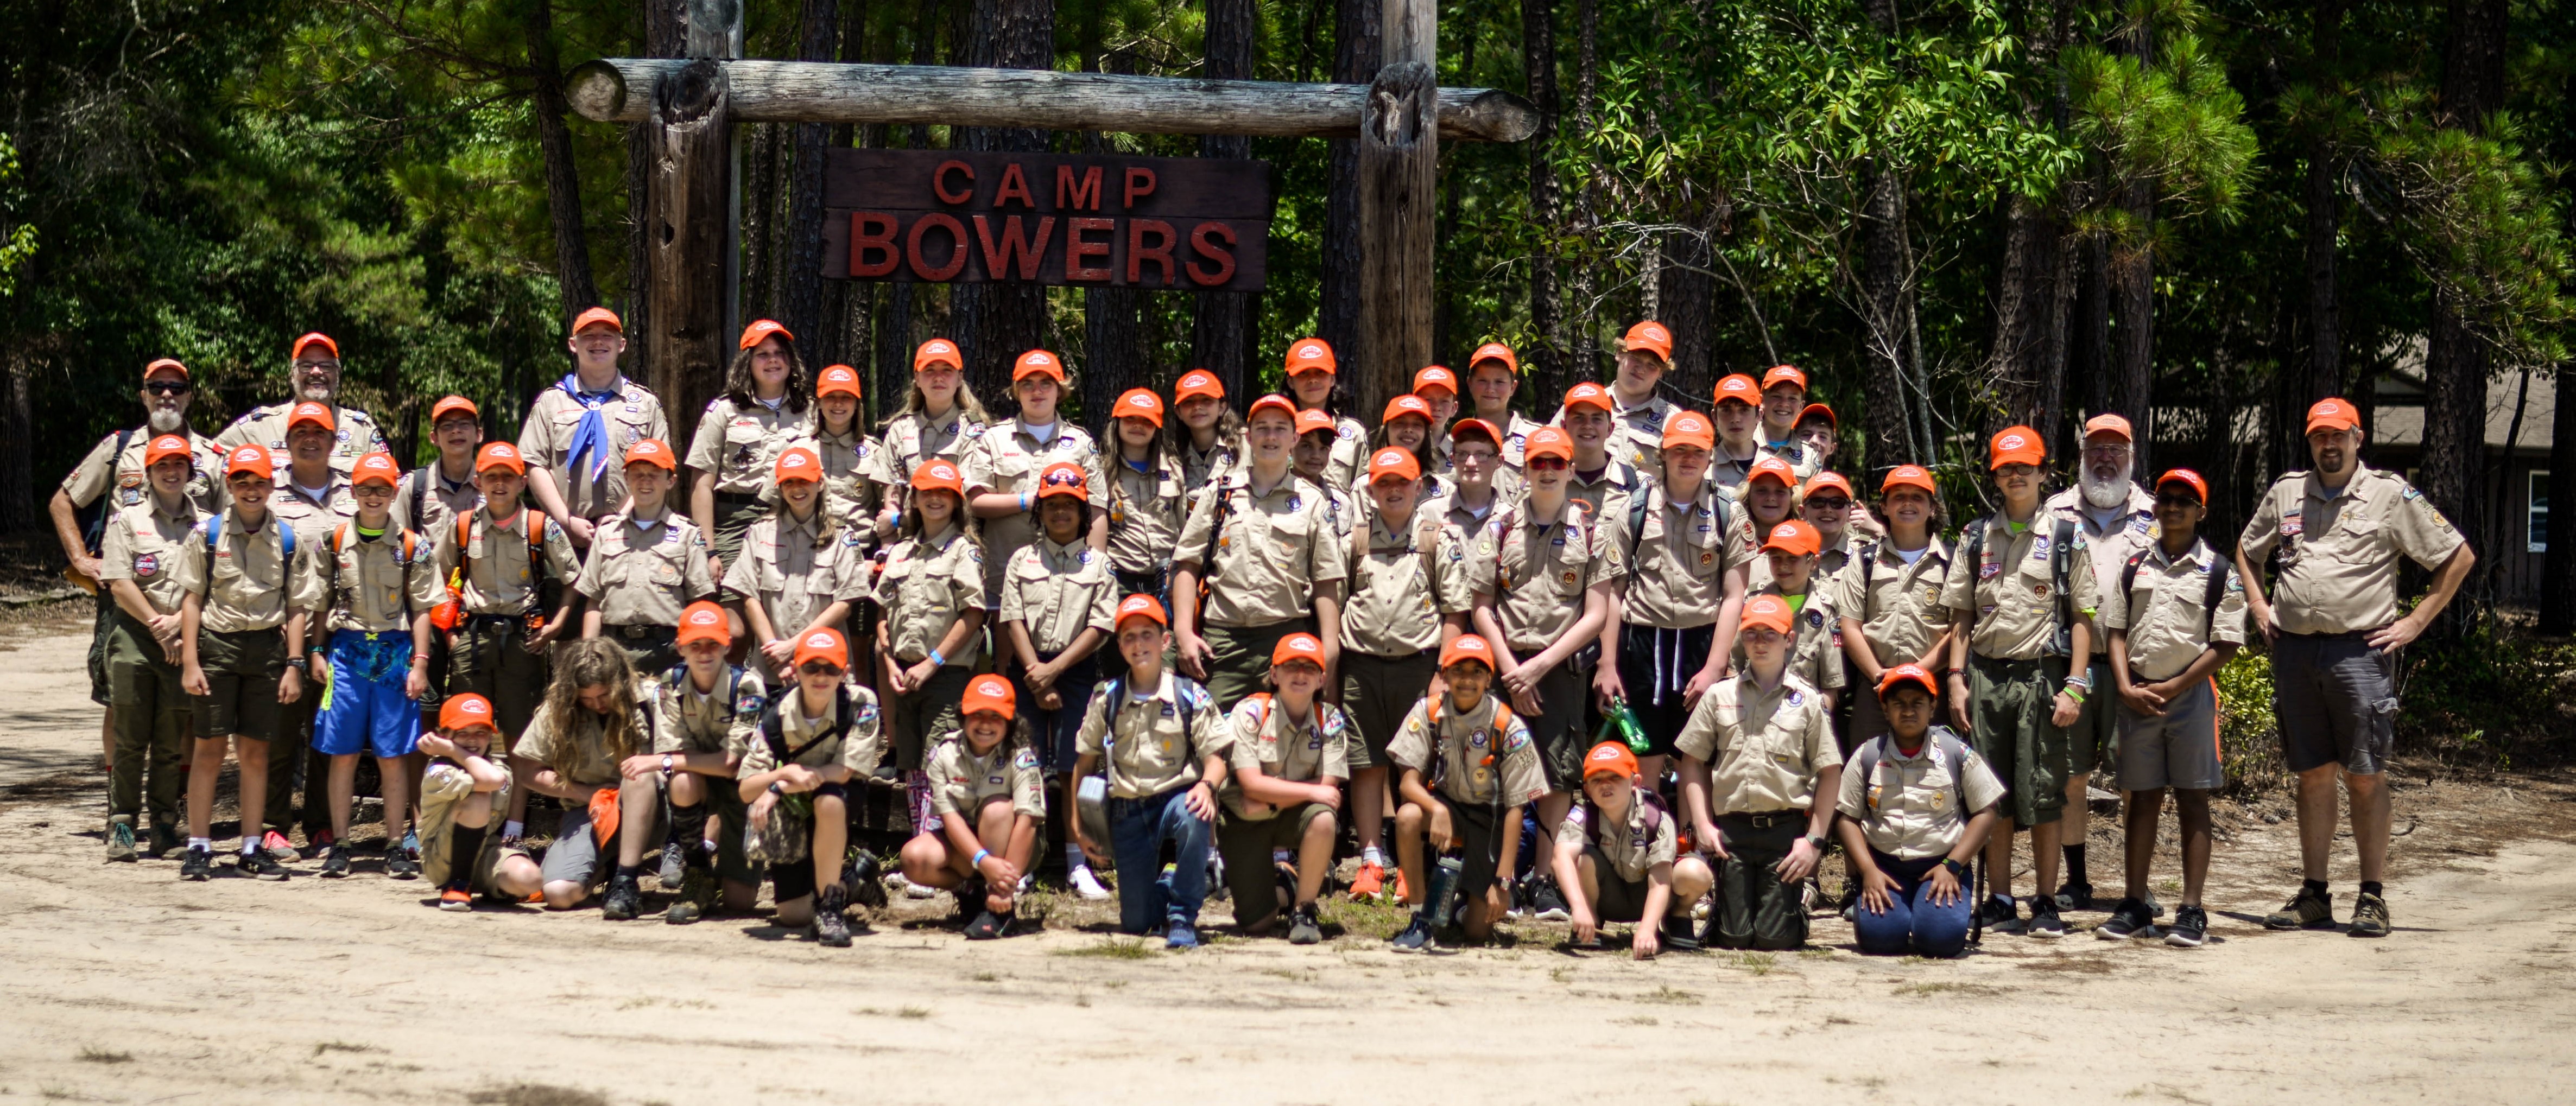 The Red Rope Challenge  Boy Scout Troop 811 – Brea, CA